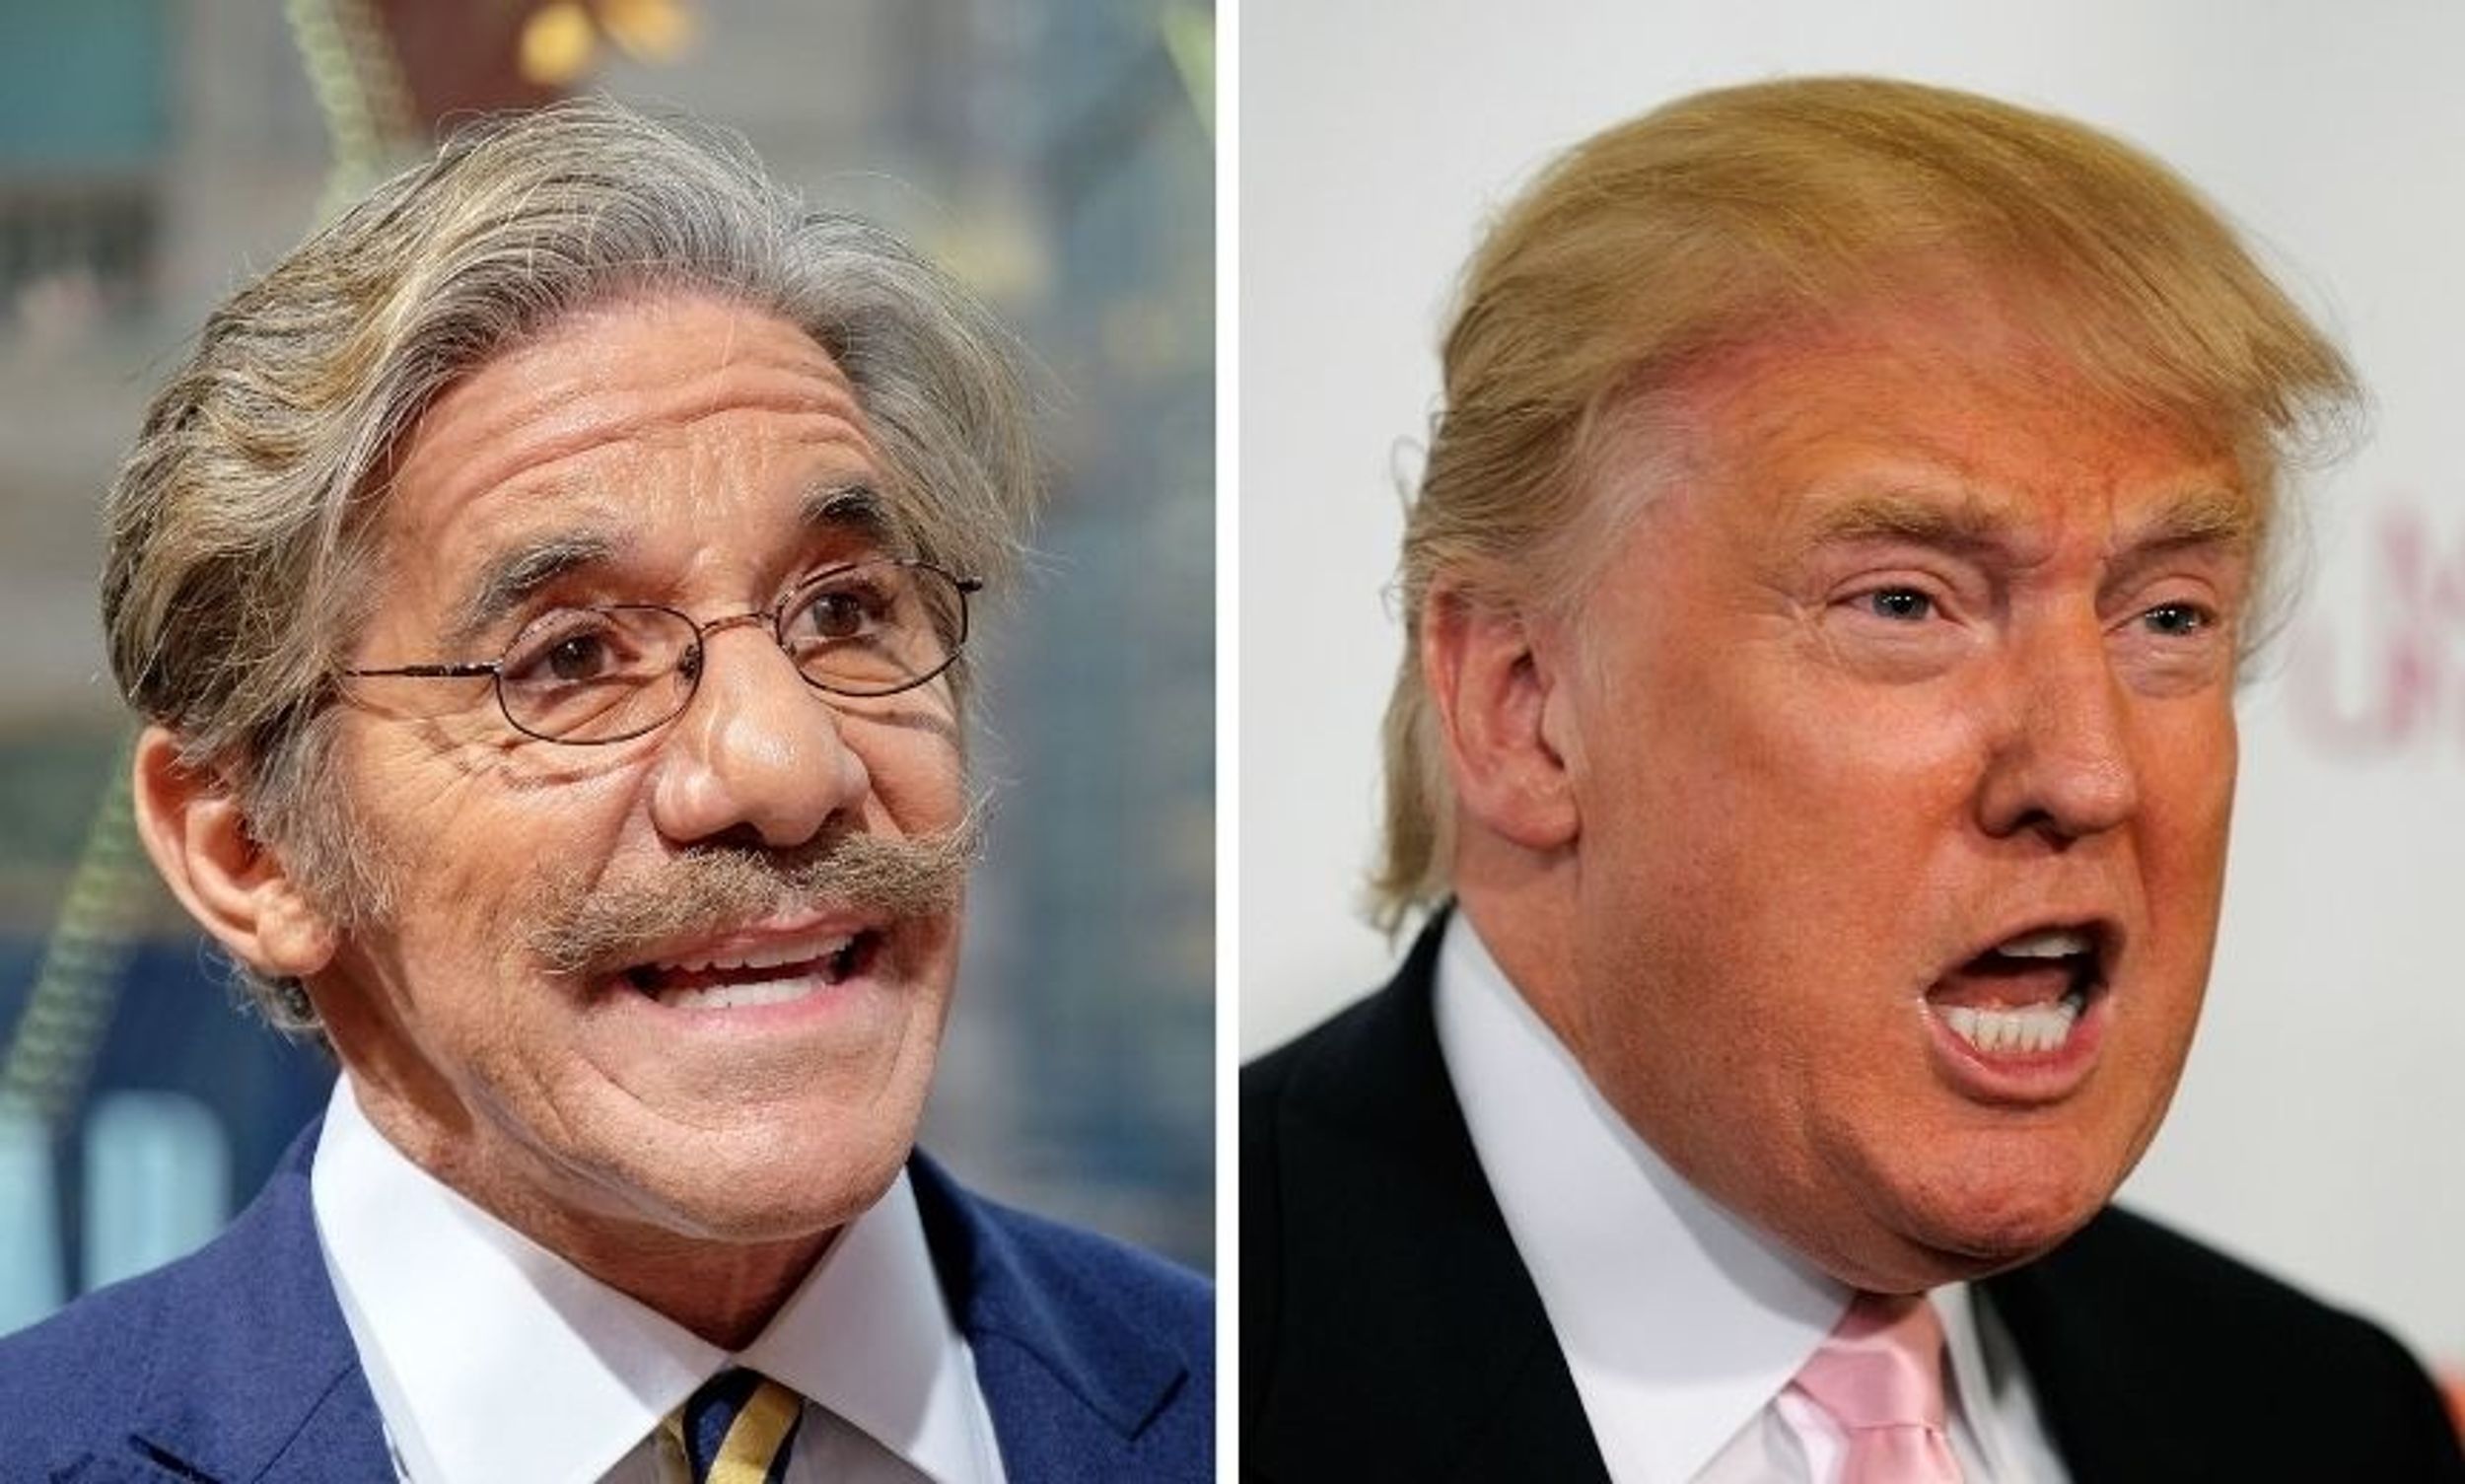 Geraldo Rivera Dragged After Tweeting That 'Realist' Trump Told Him He'll Do the 'Right Thing' Once All the Votes Are Counted